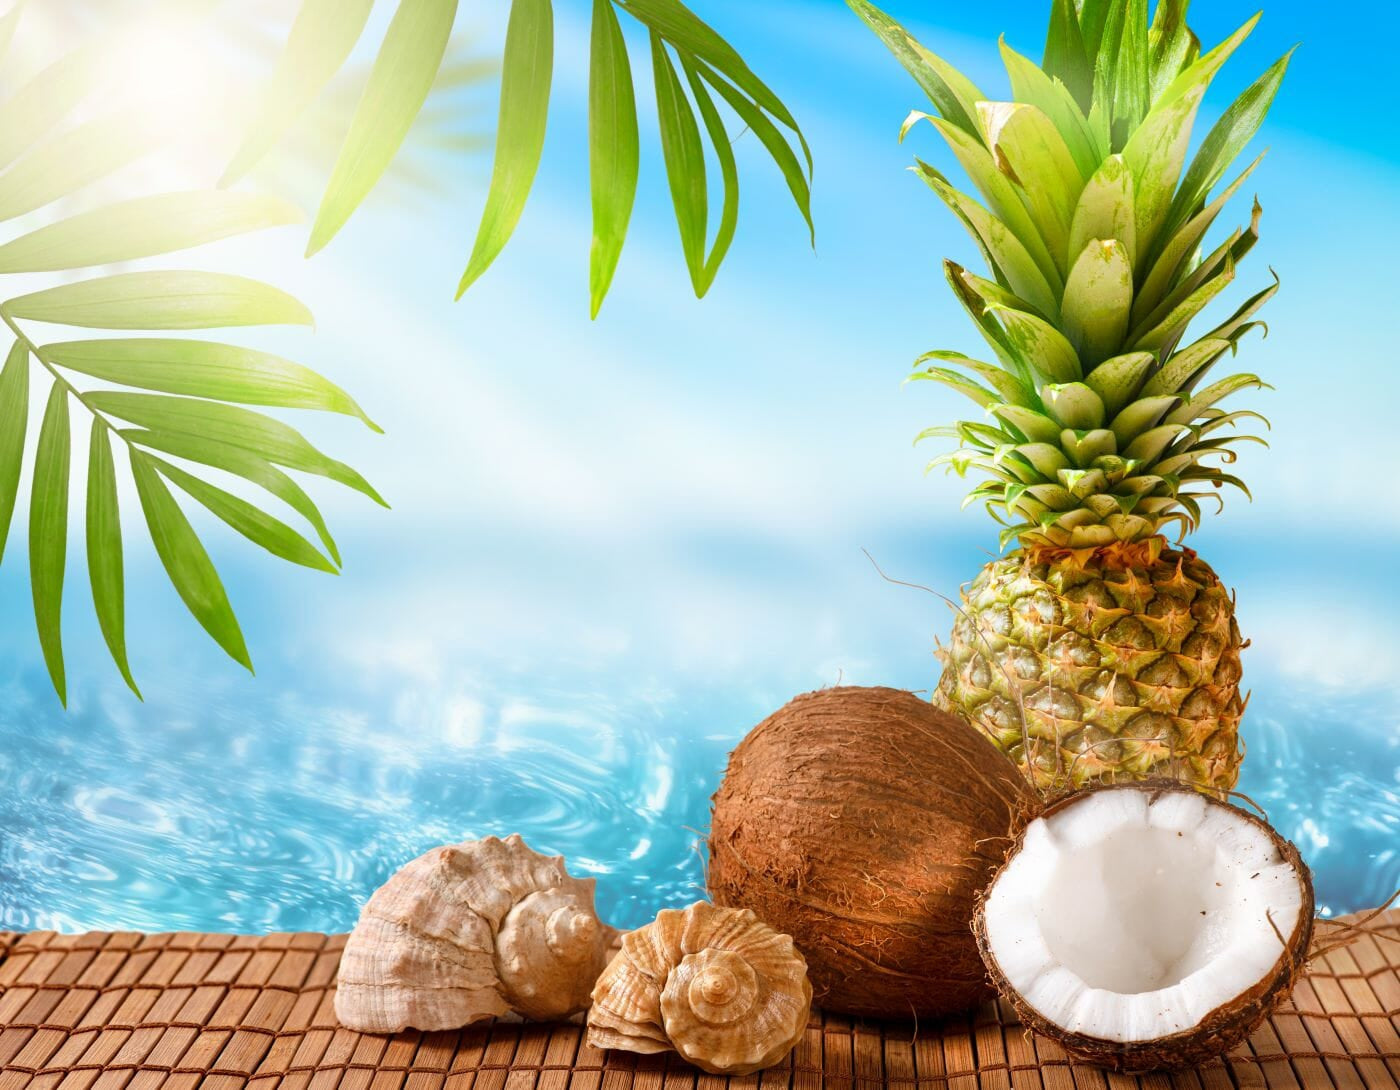 Here’s why pineapple coconut water is so good for you